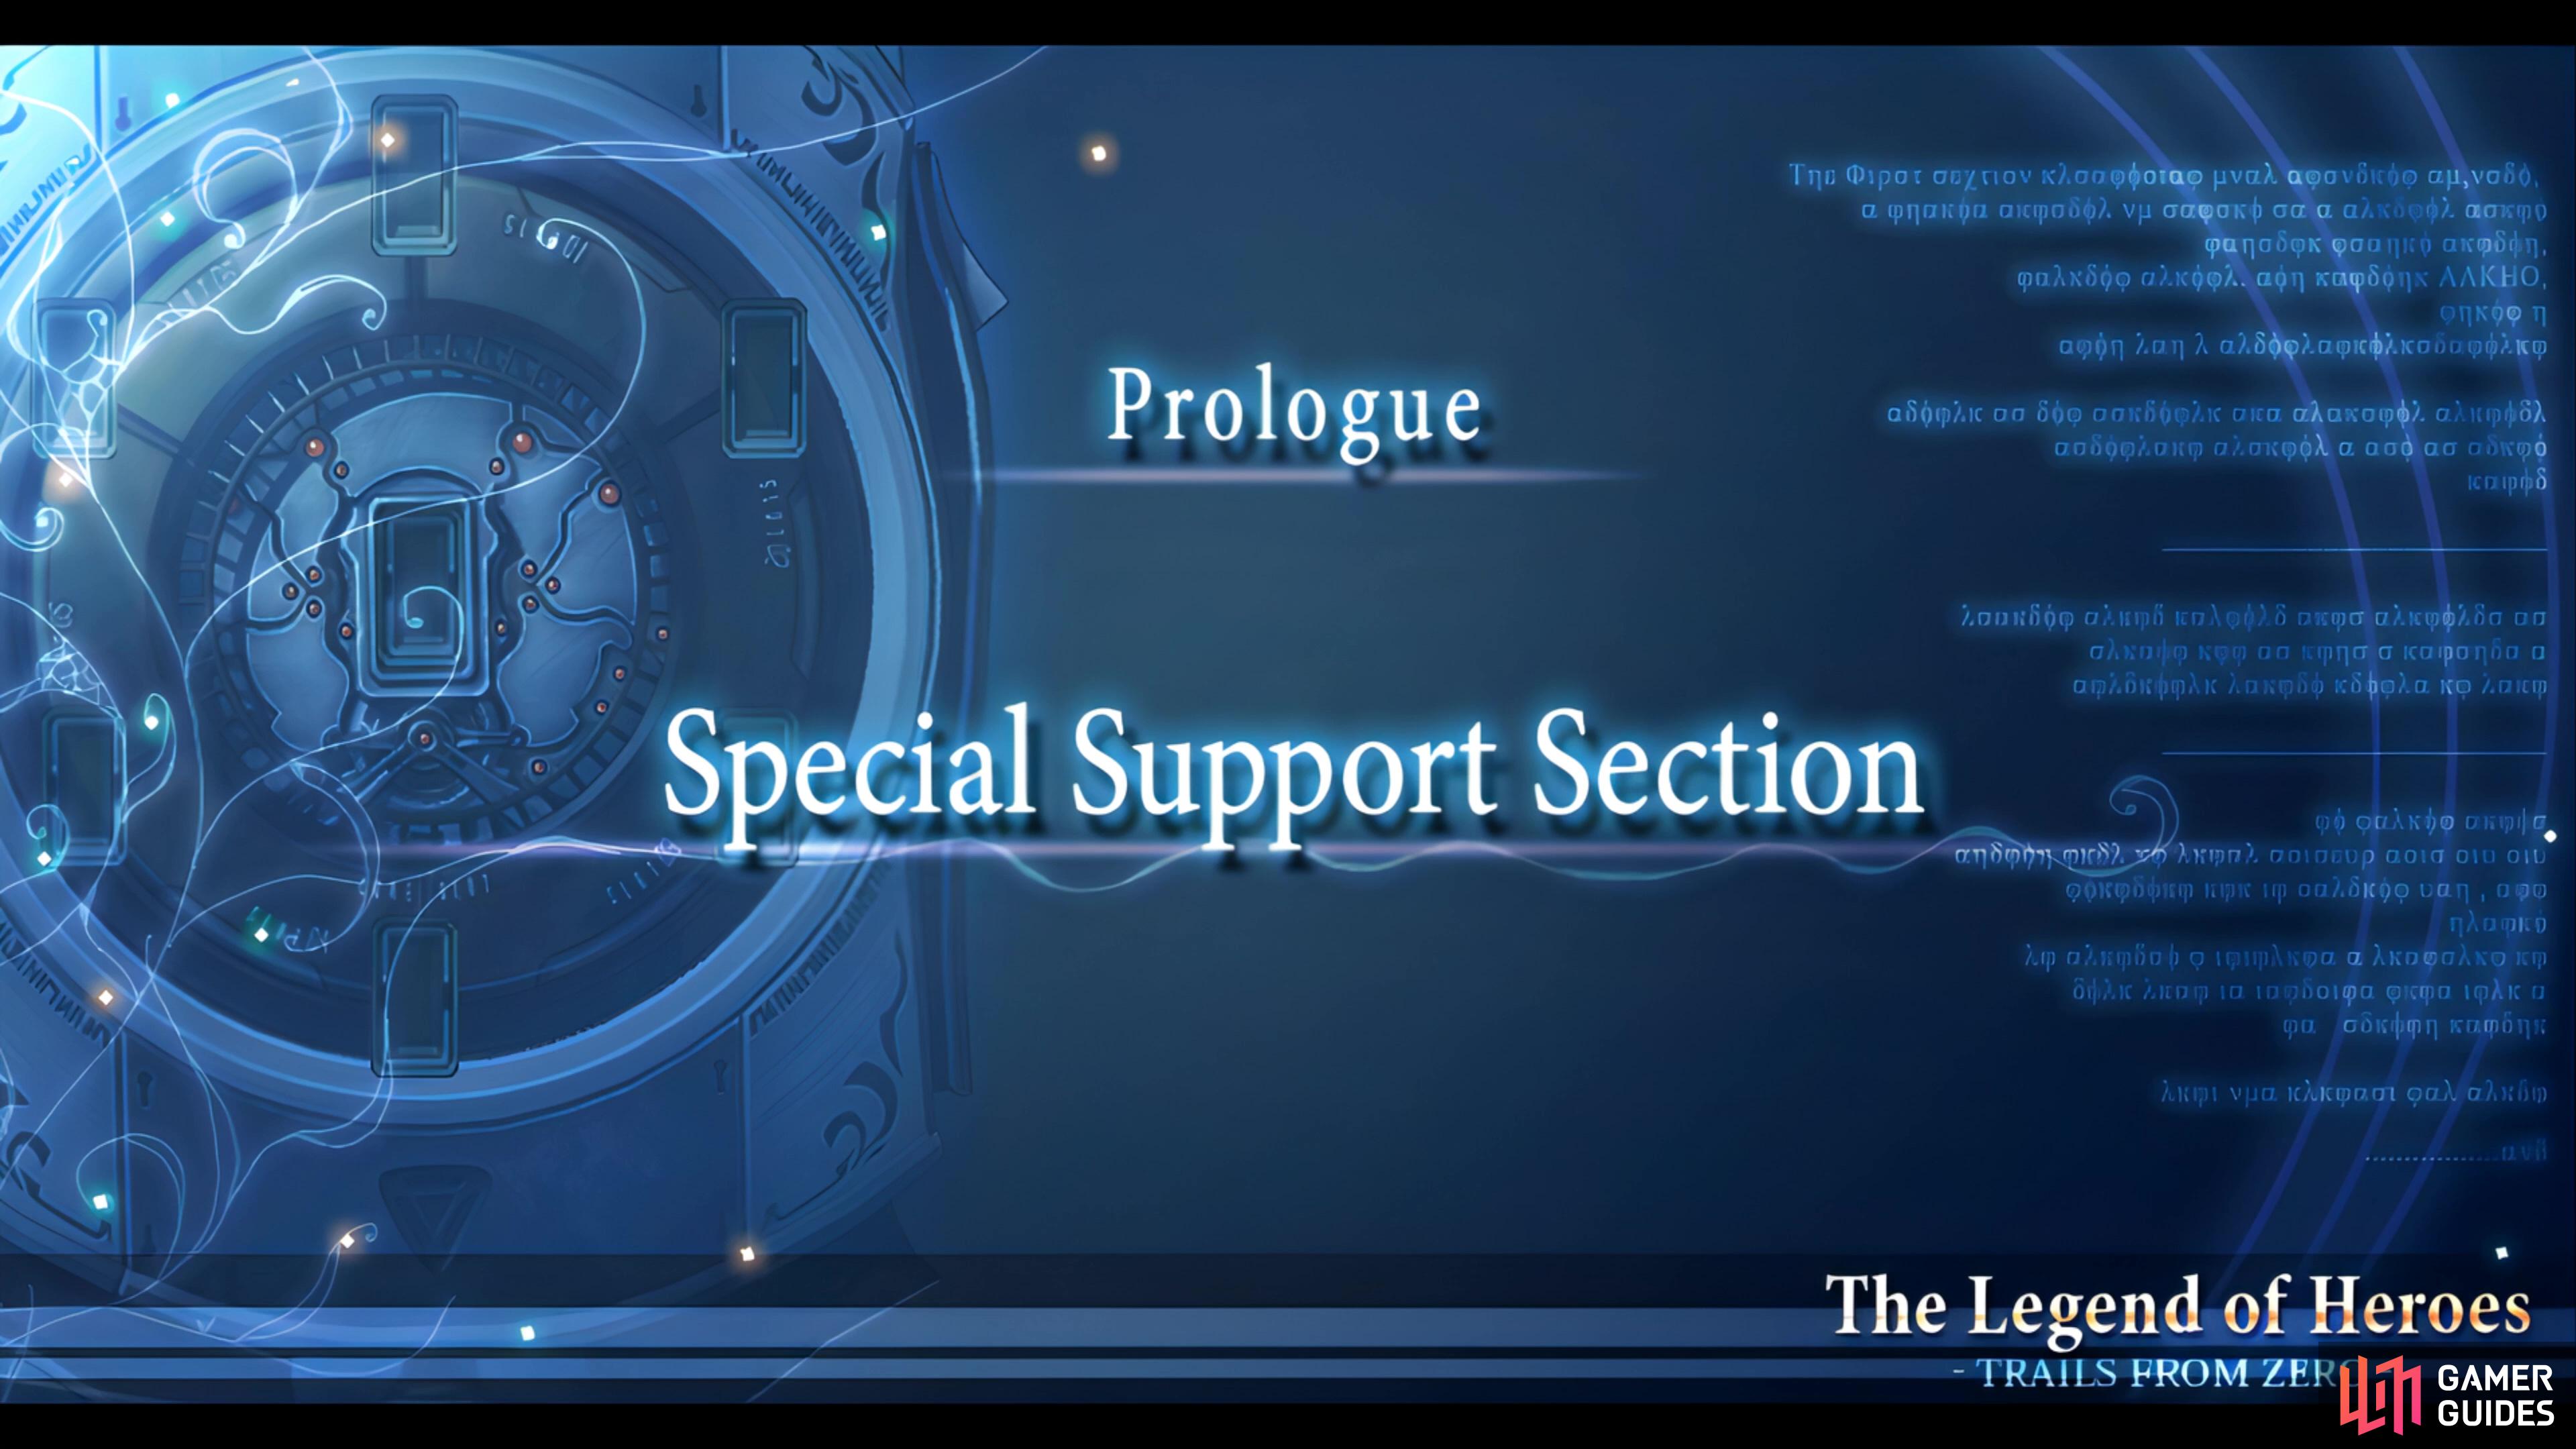 The first day of the Prologue takes place in the Geofront.